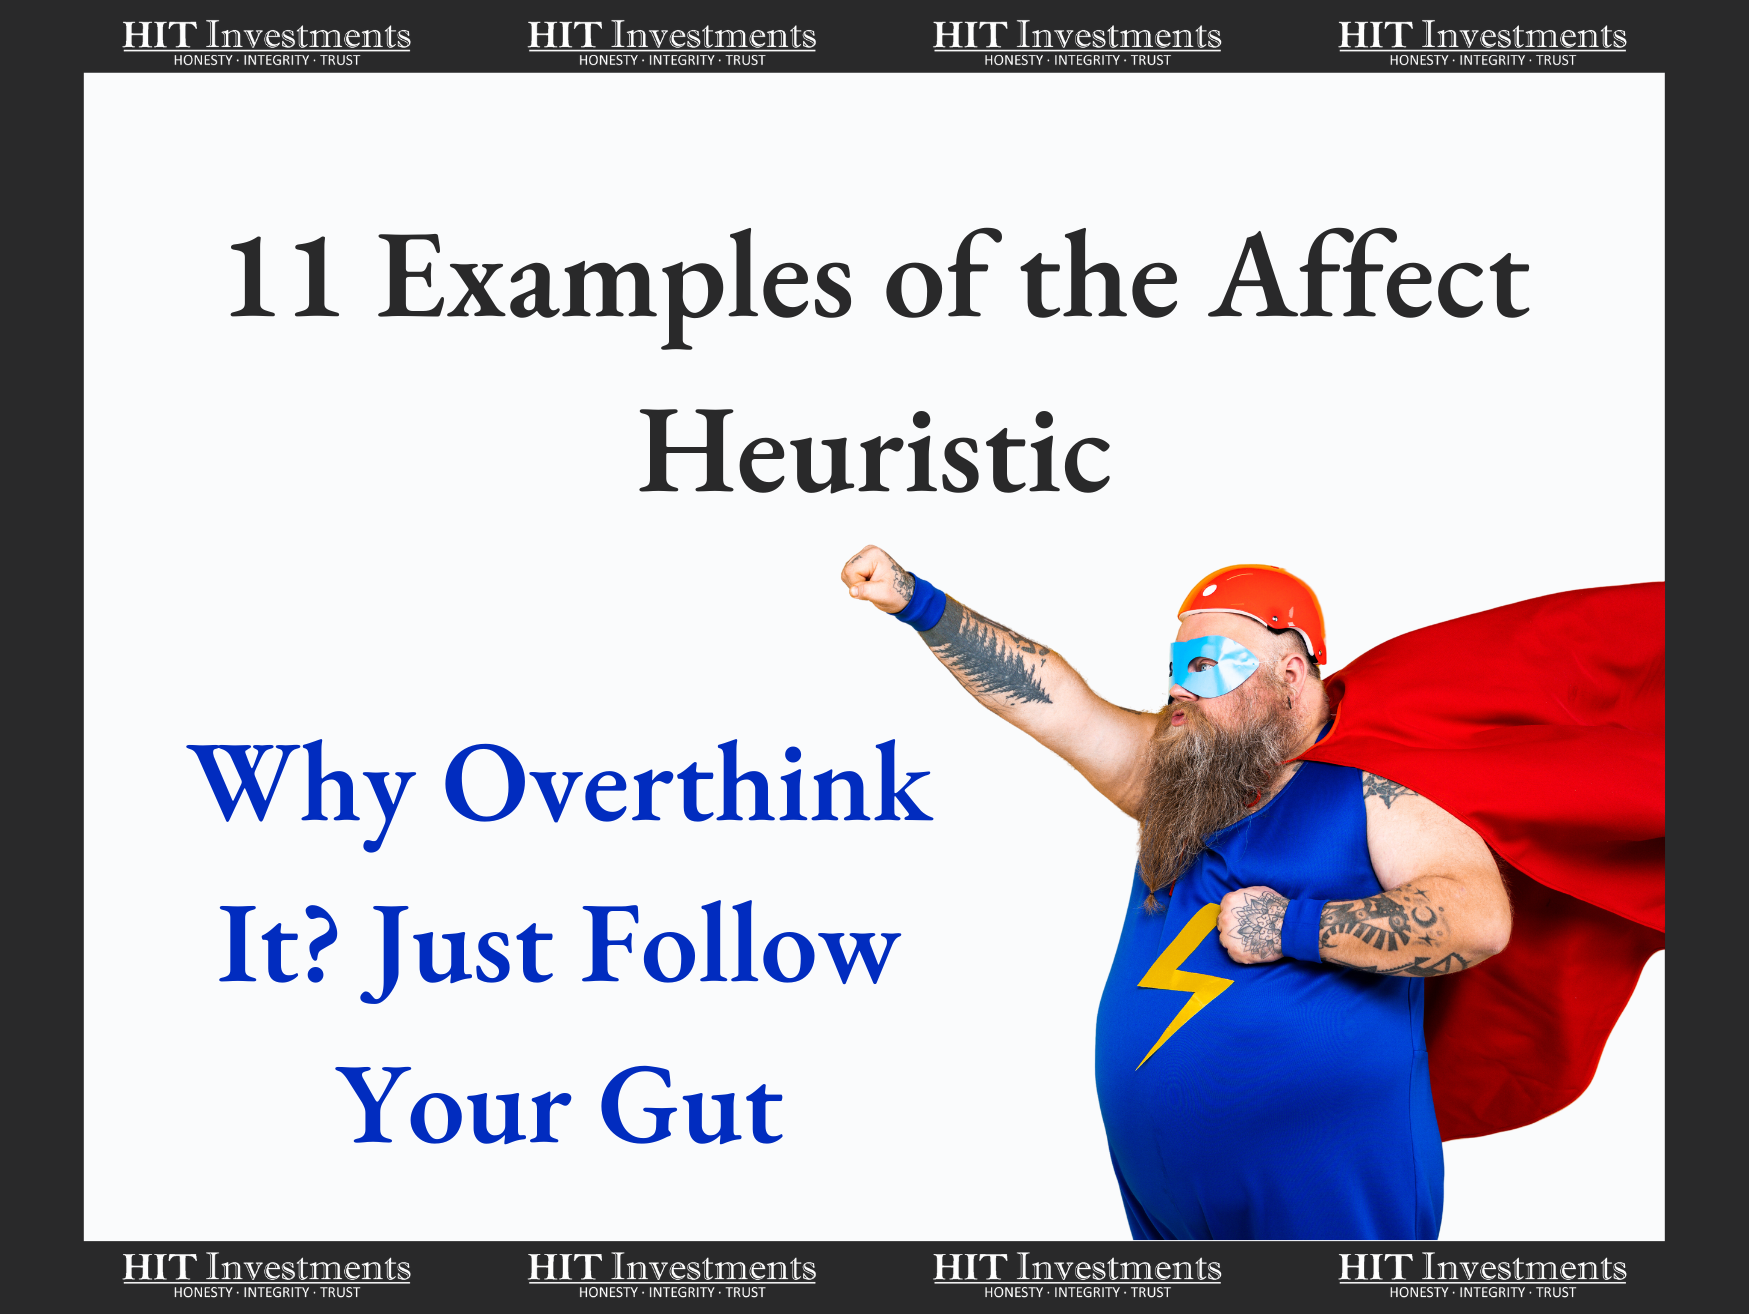 11 Examples of the Affect Heuristic